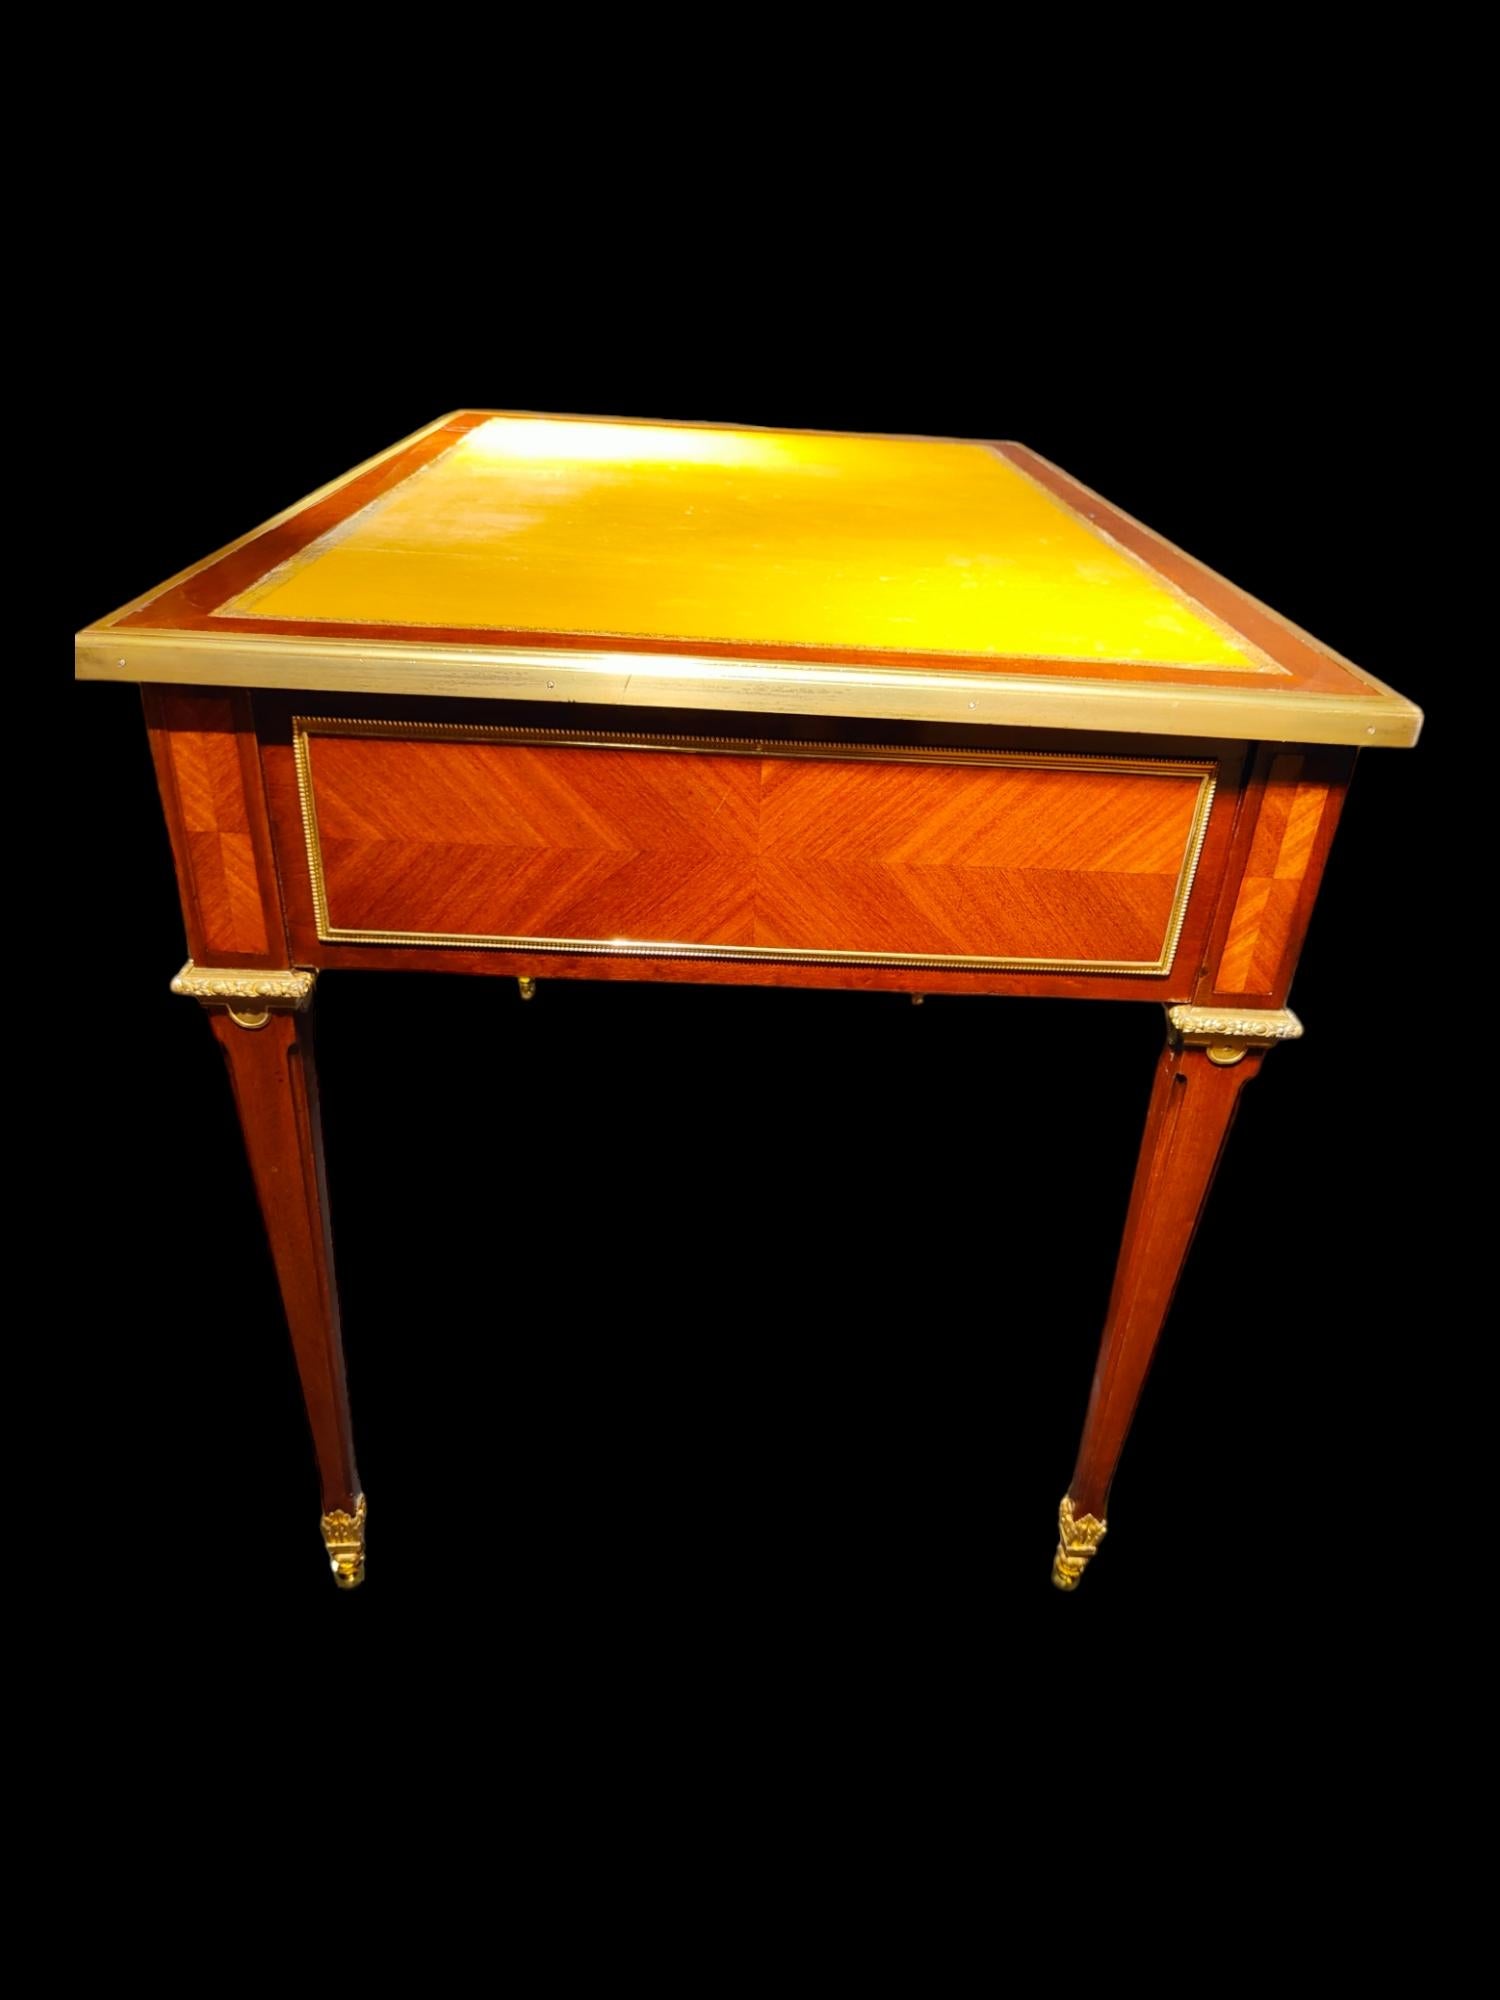 Very Fine Gilt Bronze Mounted Tulipwood and Amaranth Desk by L. Cueunieres For Sale 8